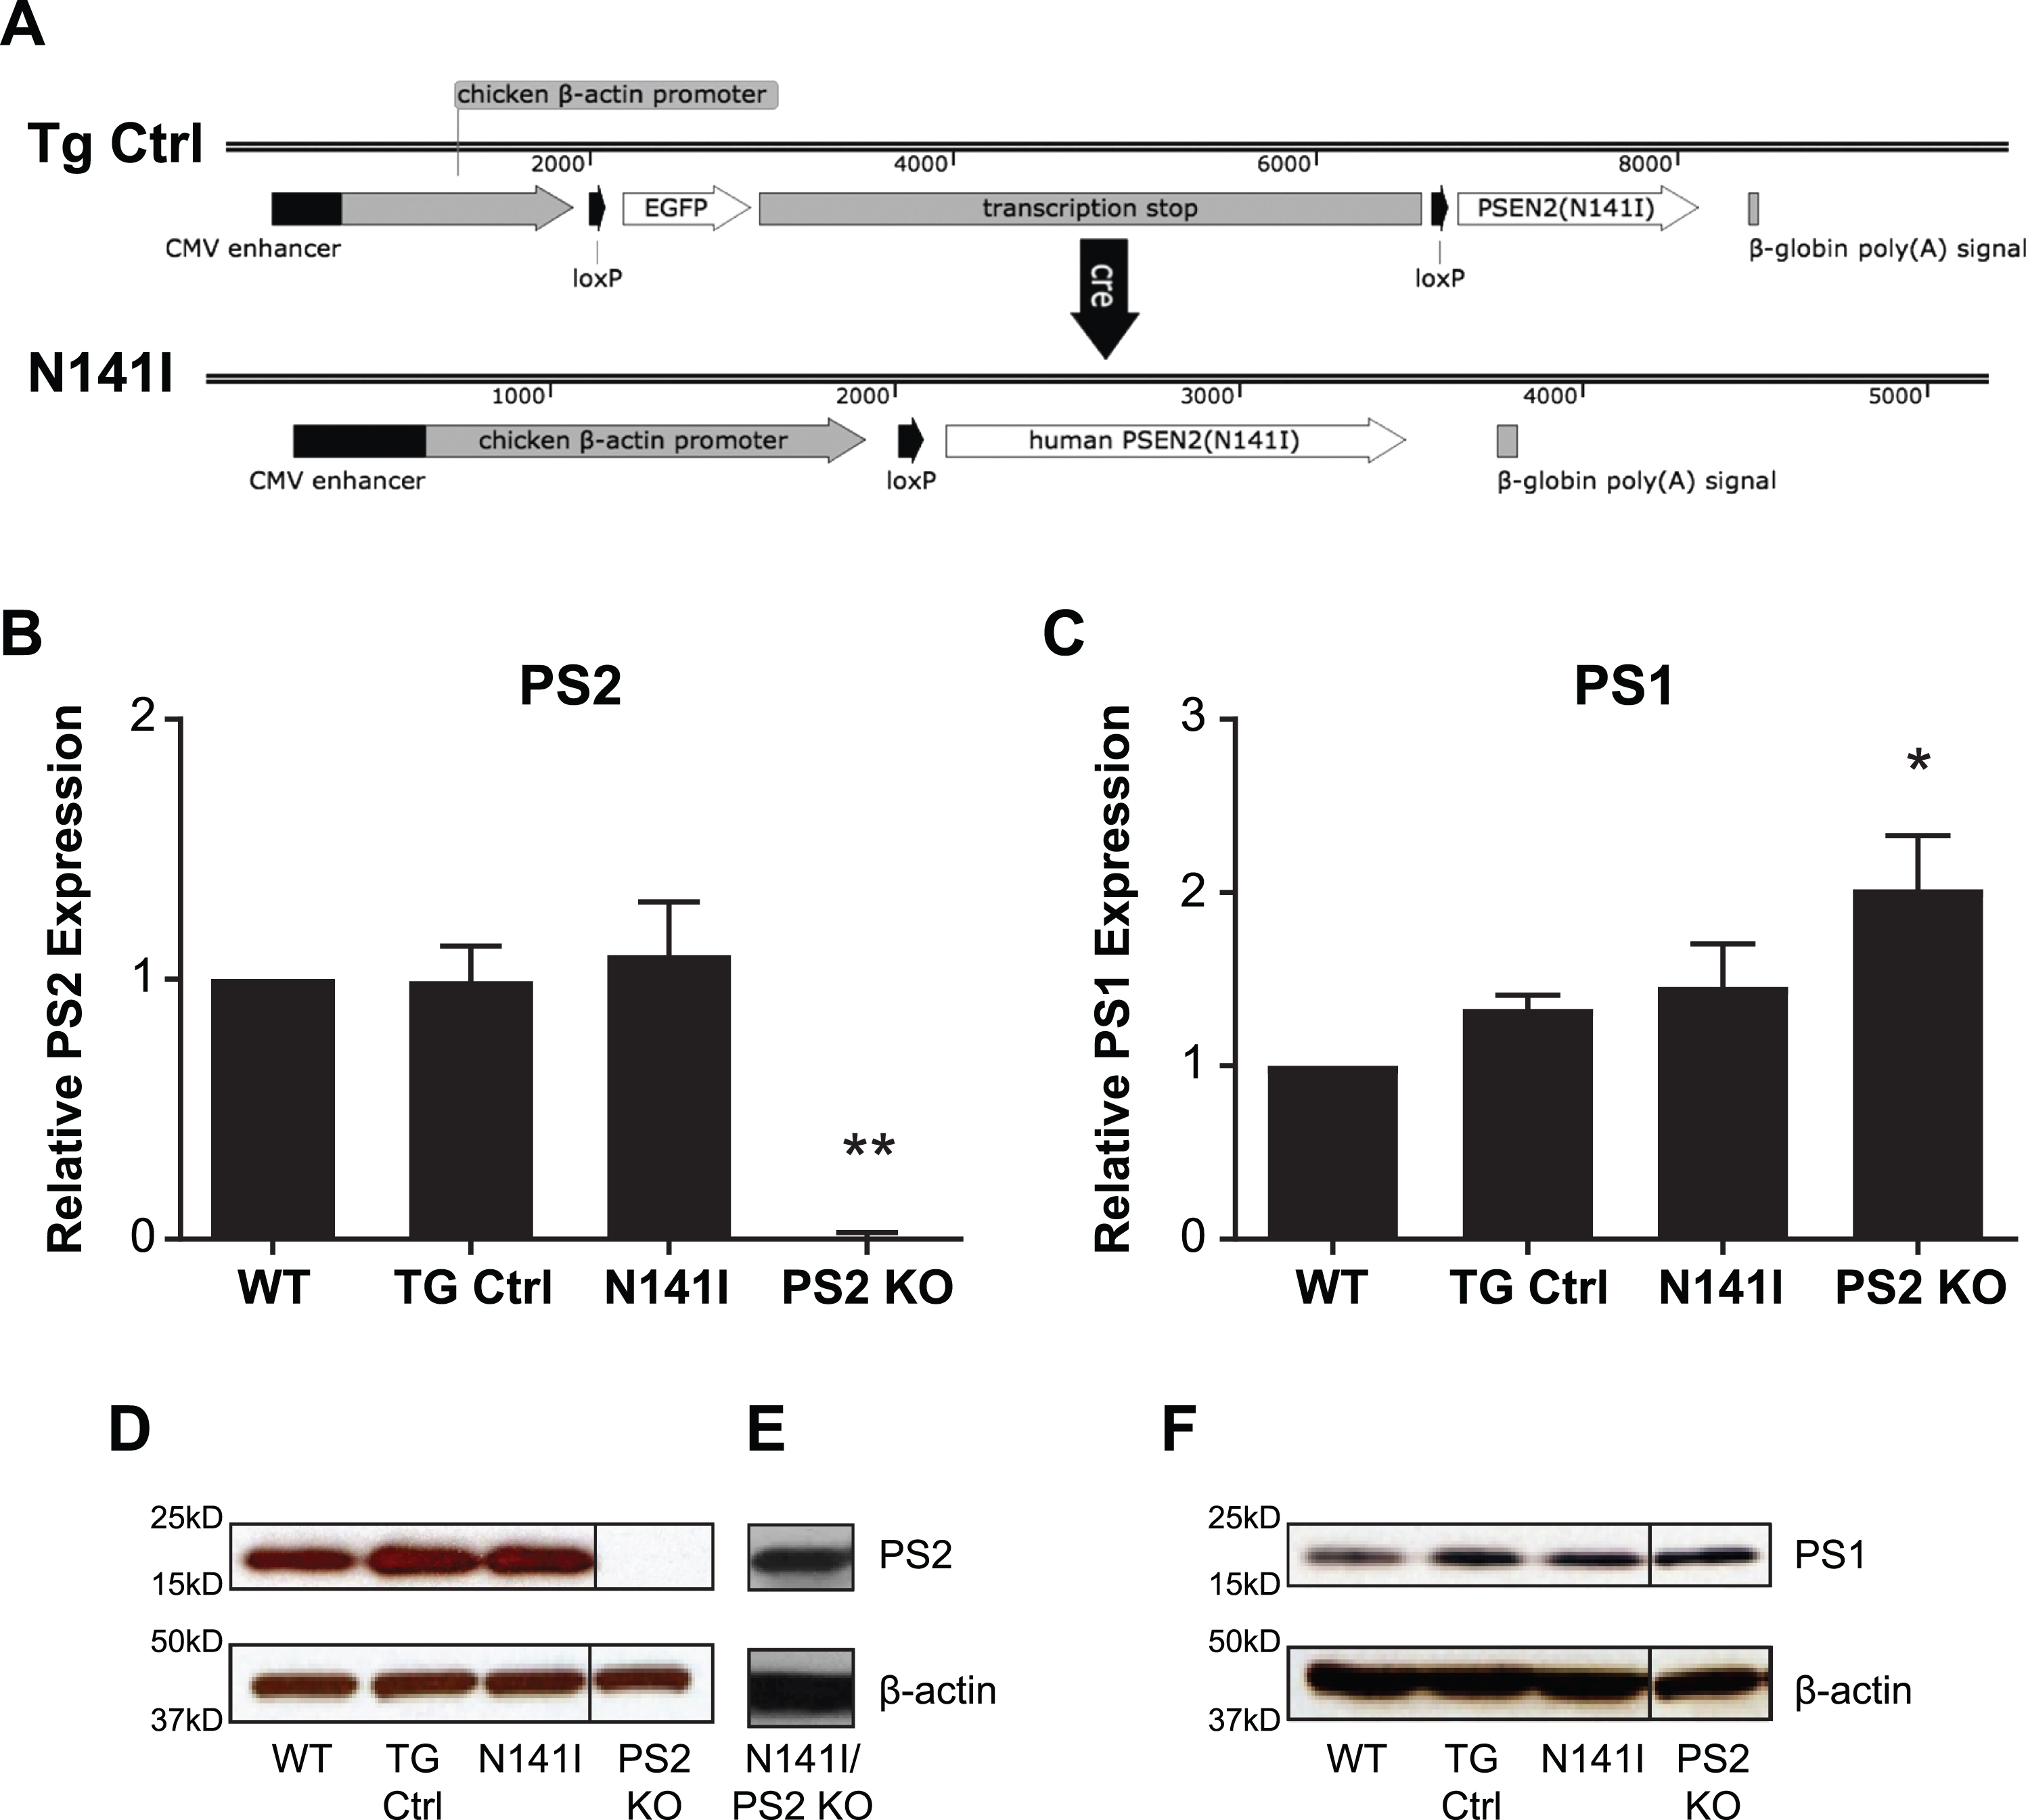 PSEN2 N141I Transgene constructs and expression of PS2 N141I in microglia. A) Control mice (TG Ctrl) express a transgene containing the PSEN2 N141I cDNA that is downstream of a floxed stop sequence: Tg(CAG-loxP-EGFP-STOP-loxP-PSEN2(N141I). Upon Cre exposure, the stop cassette is excised resulting in the transgene: Tg(CAG-loxP-PSEN2(N141I) and expression of the PSEN2 N141I (N141I). B) Microglia with one copy of human PS2 N141I and one copy of wildtype mouse PS2 show similar PS2 protein expression compared to transgenic control (TG Ctrl) and wildtype microglia (WT). Data are mean±SEM, n = 3 and represent experiments from independent cultures, *p≤0.05; ***p≤0.001, t-test analysis. C) PS2 KO microglia express significantly increased PS1, while TG and N141I do not have significantly different levels from control. Data are mean±SEM, n = 3 and represent experiments from independent cultures, *p≤0.05; ***p≤0.001, t-test analysis D) Representative western blot of lysates analyzed in (B) prepared from primary microglia isolated from WT, TG Ctrl, and N141I on a hemizygous murine Psen2 background immunolabeled for PS2. PS2 KO lysate is used as negative control. E) Lysate prepared from microglia isolated from a PS2 N141I expressing animal crossed to PS2 KO background shows PS2 expression confirming that the transgene expresses mutant PS2. F) Representative western blot analysis of lysates analyzed in (C) illustrating PS1 expression. PS2 and PS1 expression is similar in PS2 N141I microglia relative to wildtype and TG Ctrl.